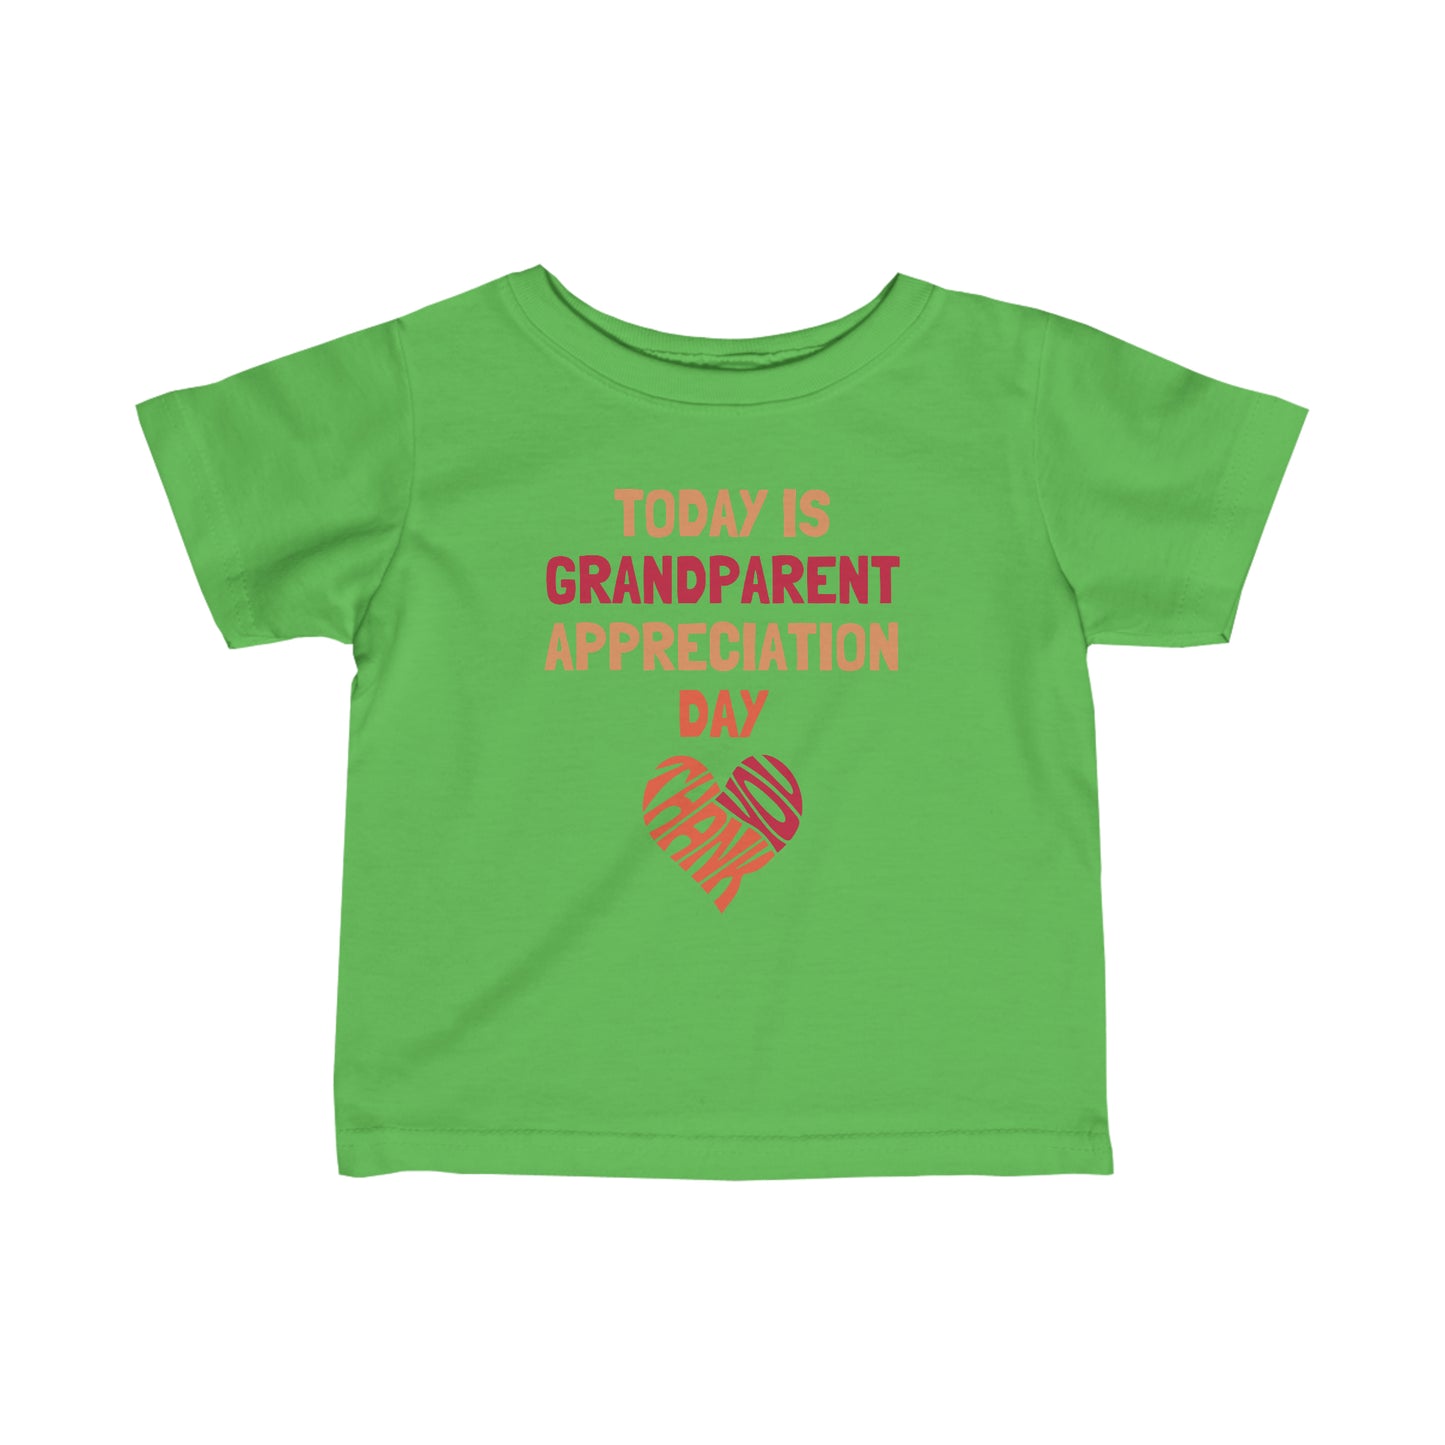 Today is Grandparent Appreciation Day - Infant Fine Jersey Tee